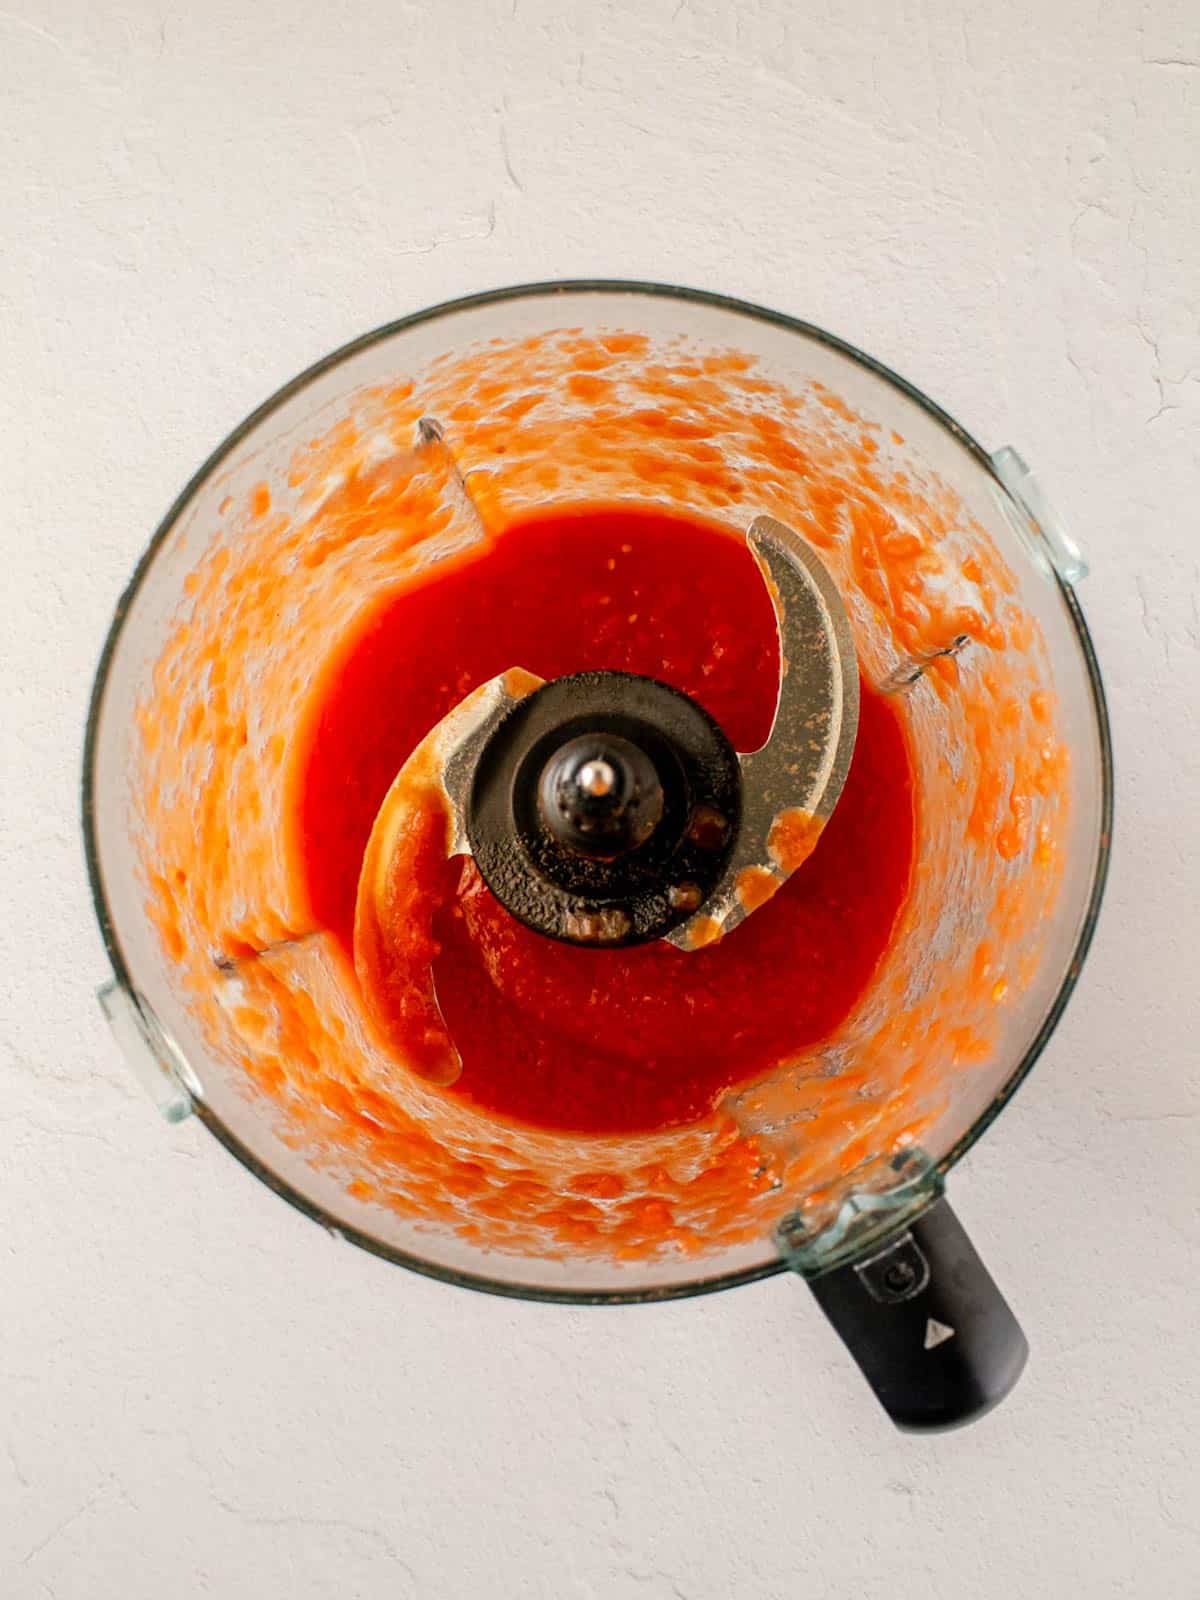 Canned tomatoes puréed in a food processor.